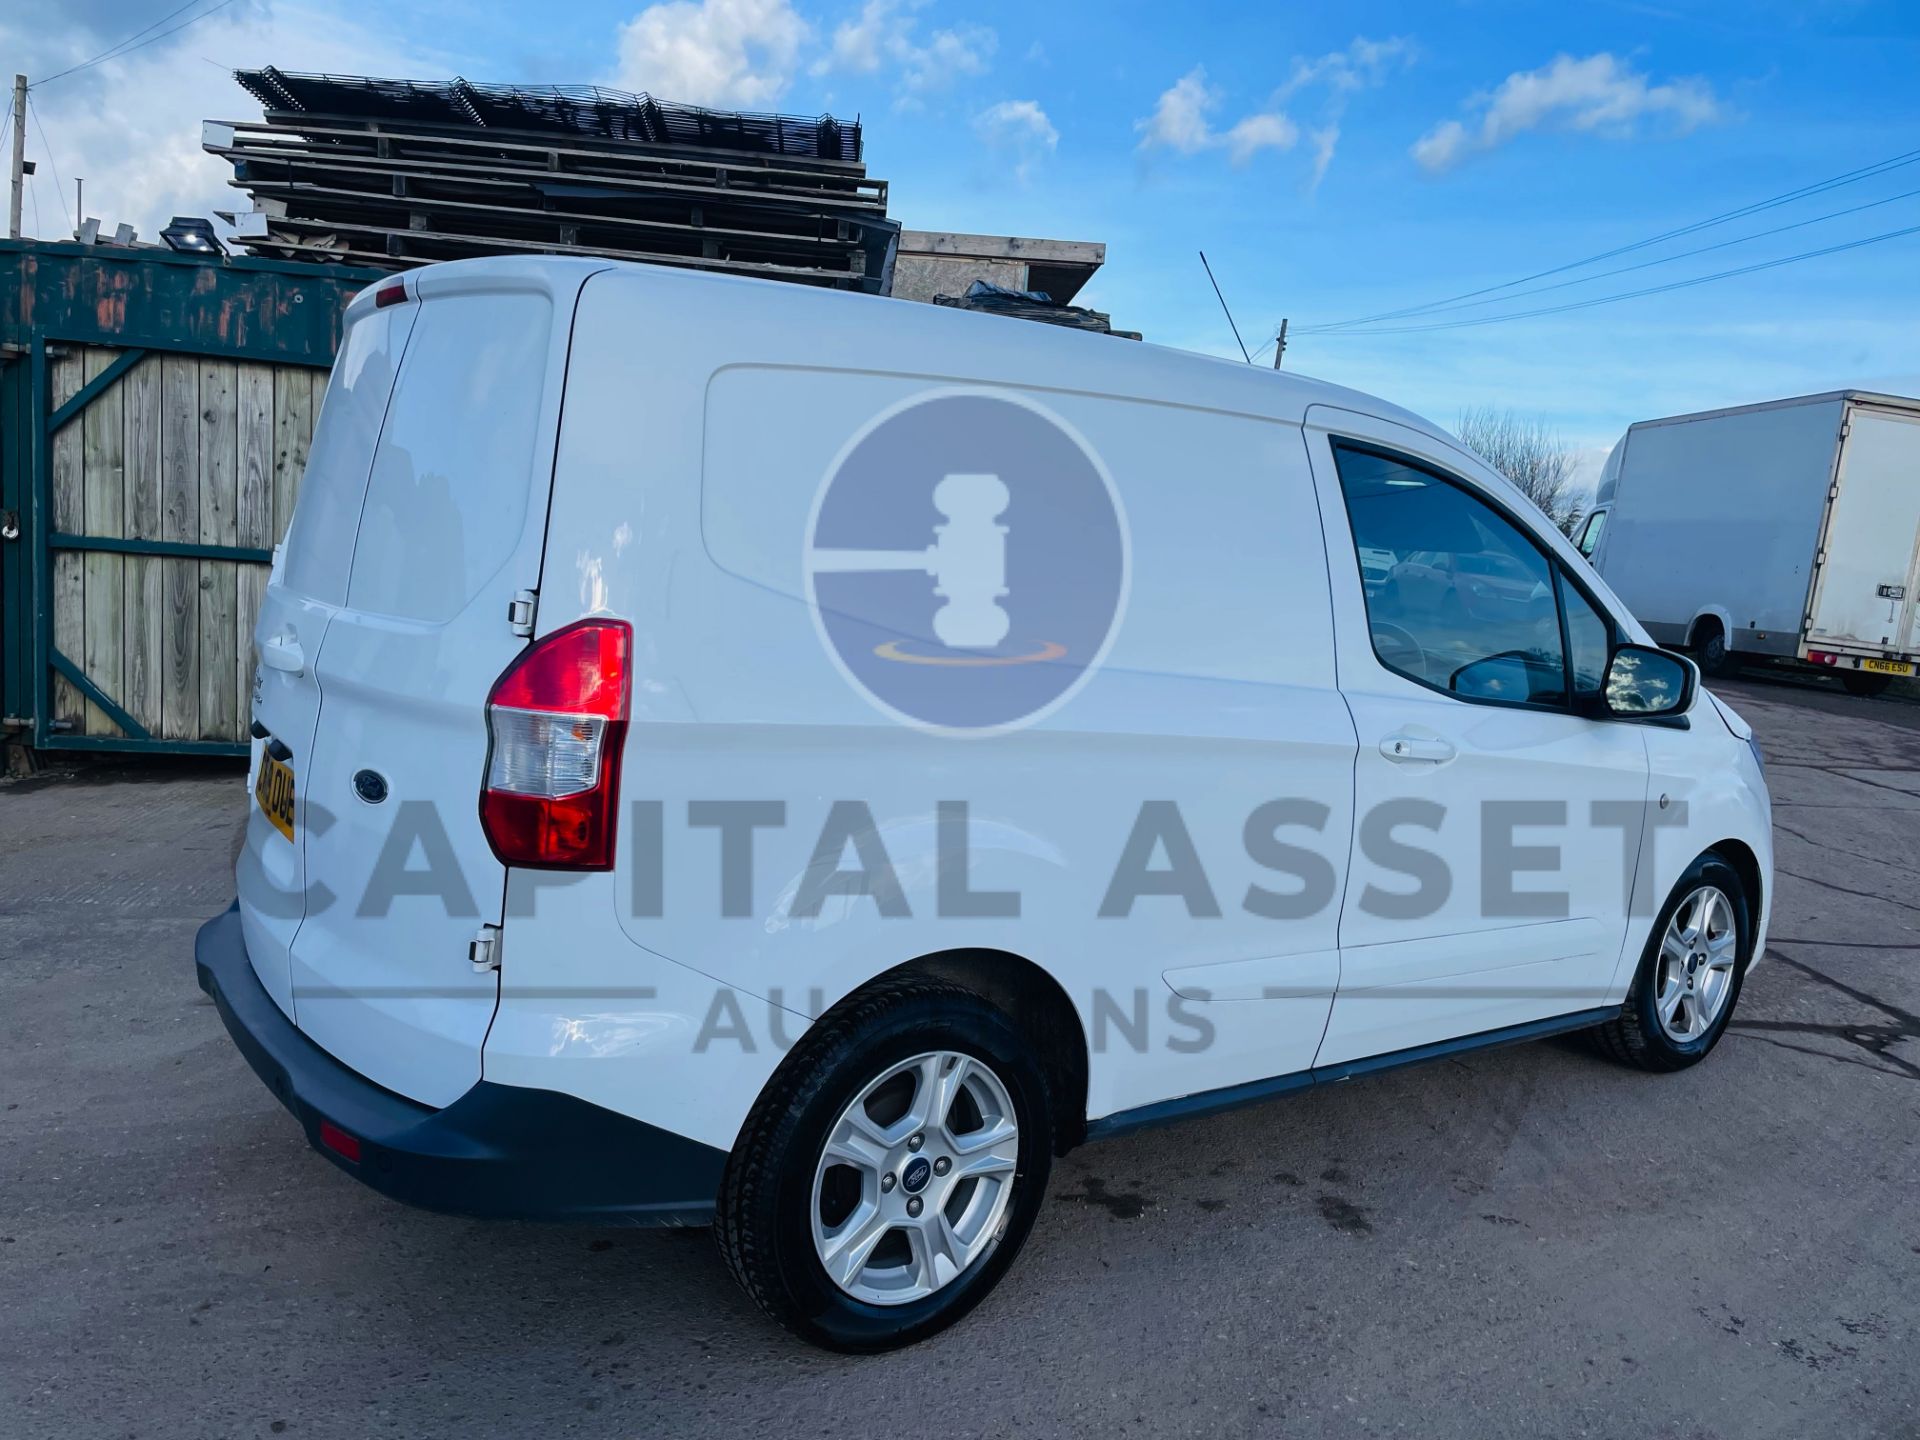 FORD TRANSIT COURIER *LIMITED EDITION* PANEL VAN (2019) '1.5 TDCI - 6 SPEED' A/C & SAT NAV (1 OWNER) - Image 8 of 36